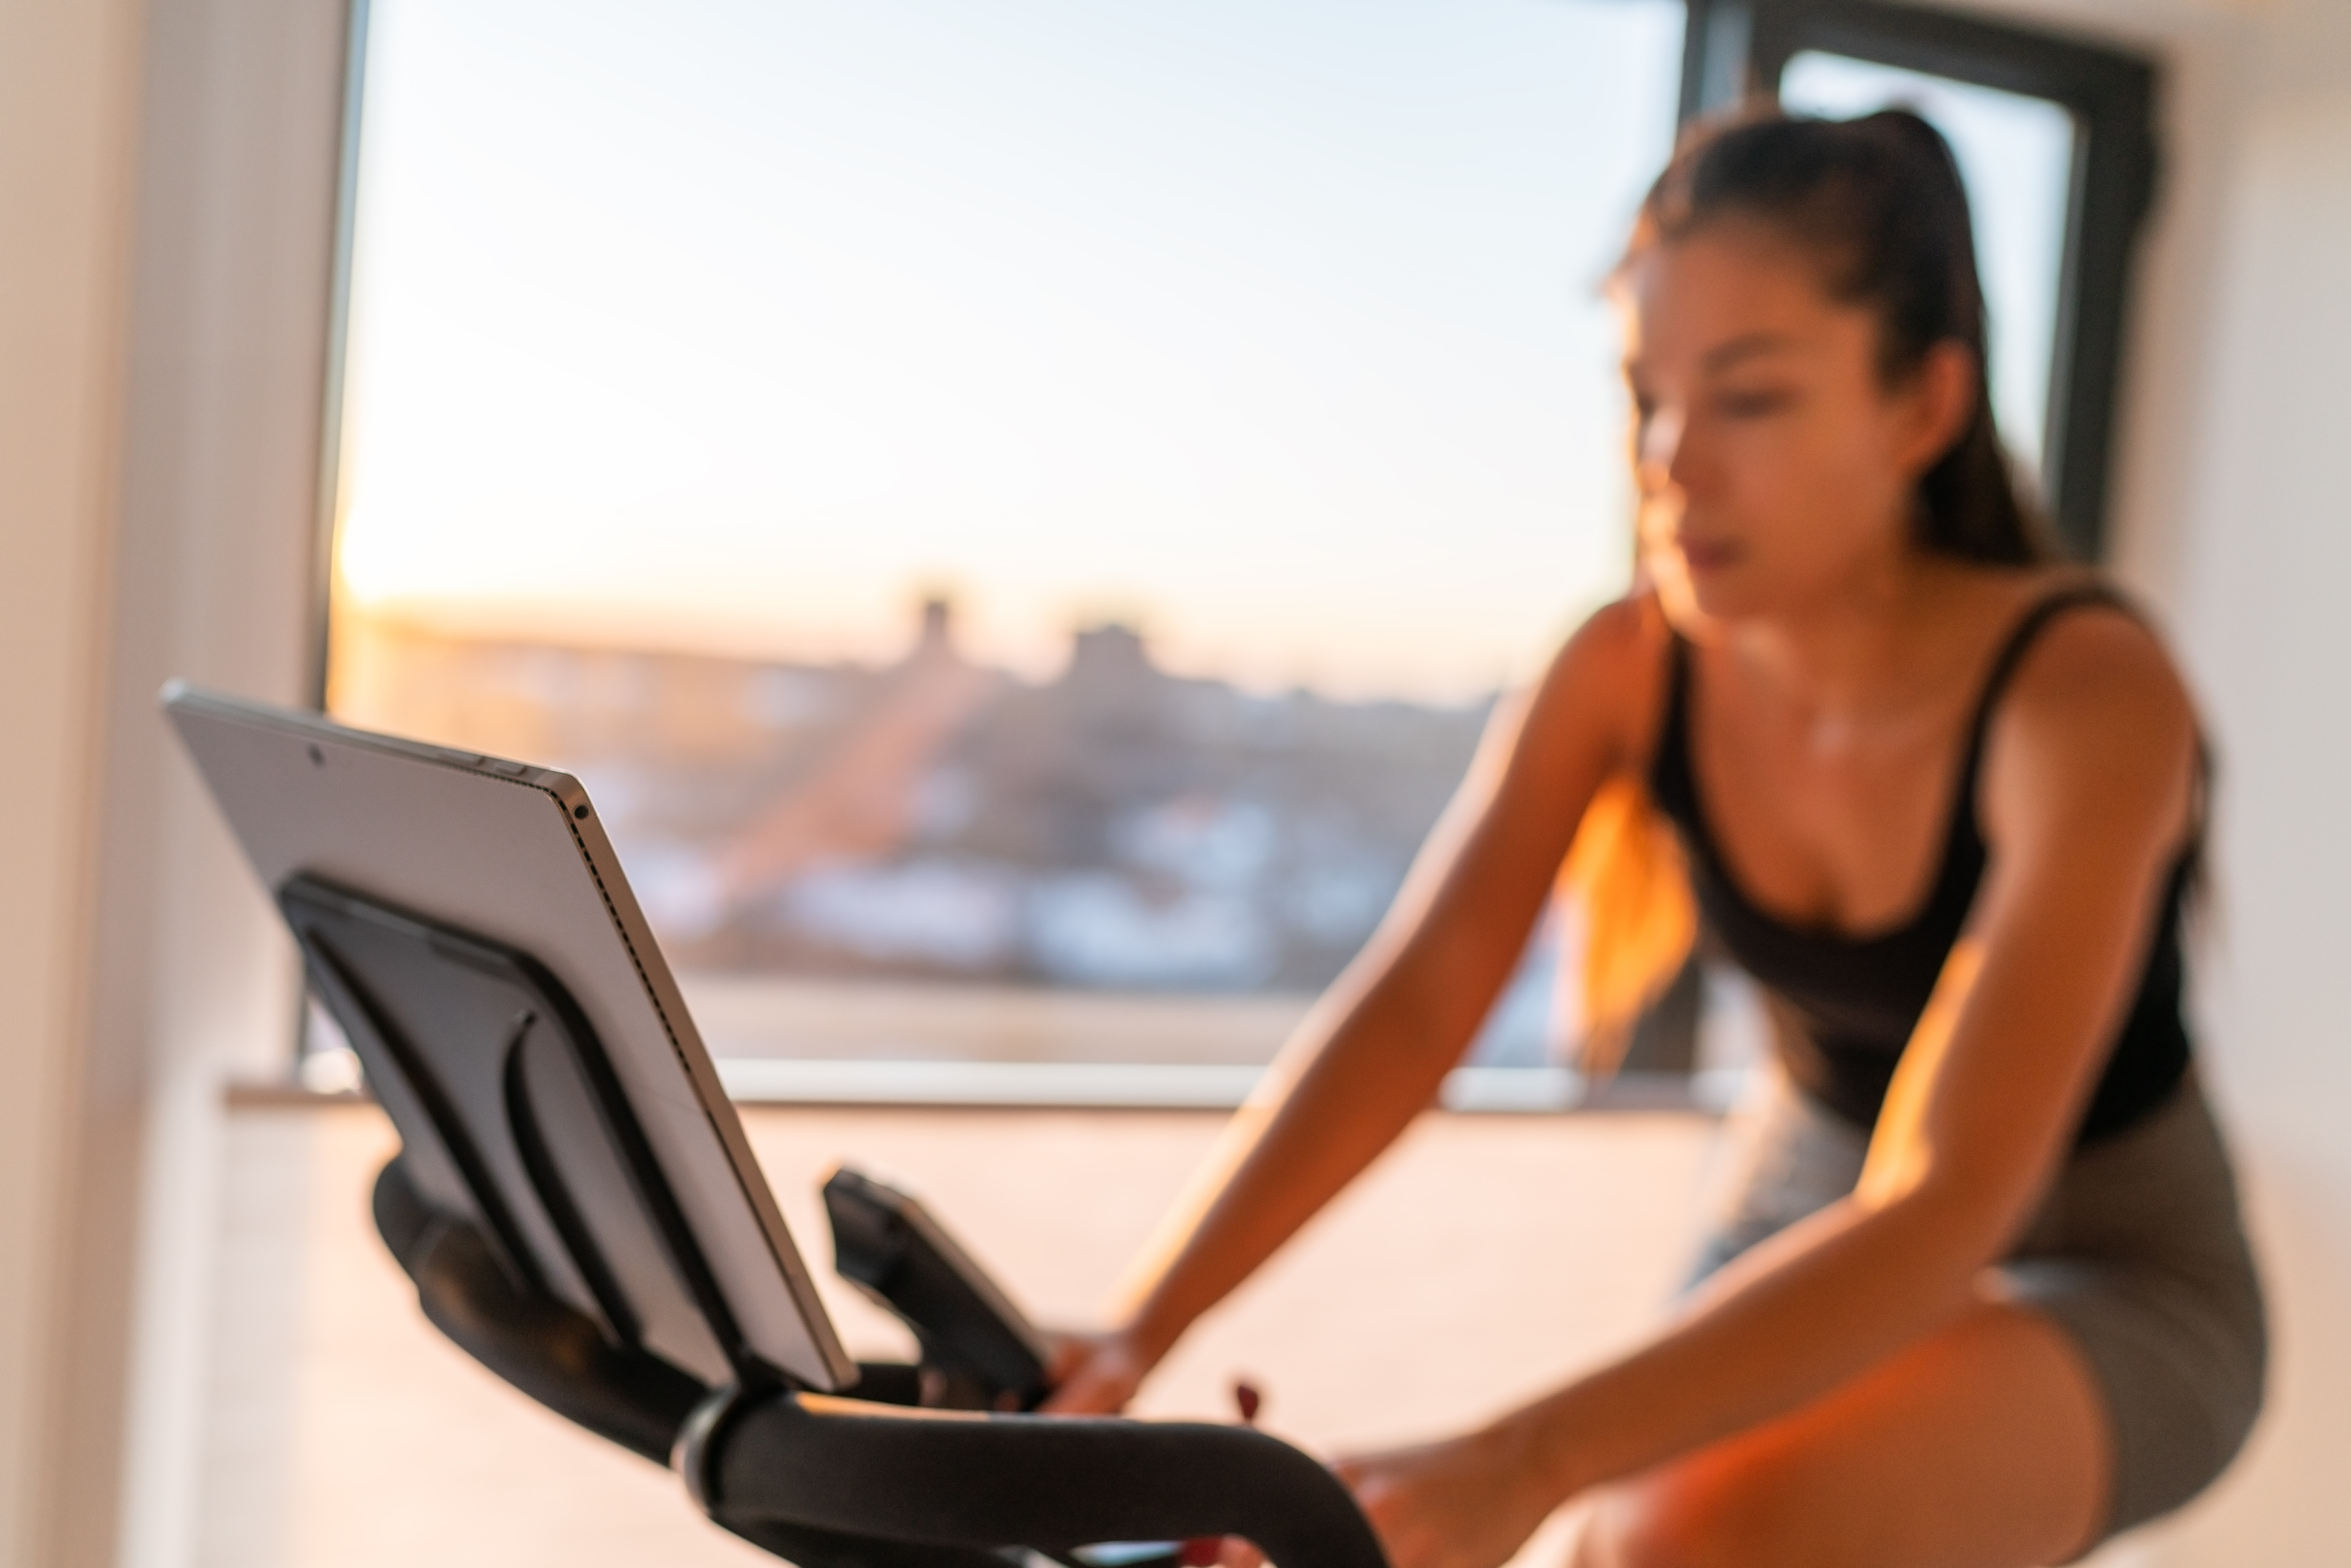 How smart gym equipment brings the workout home